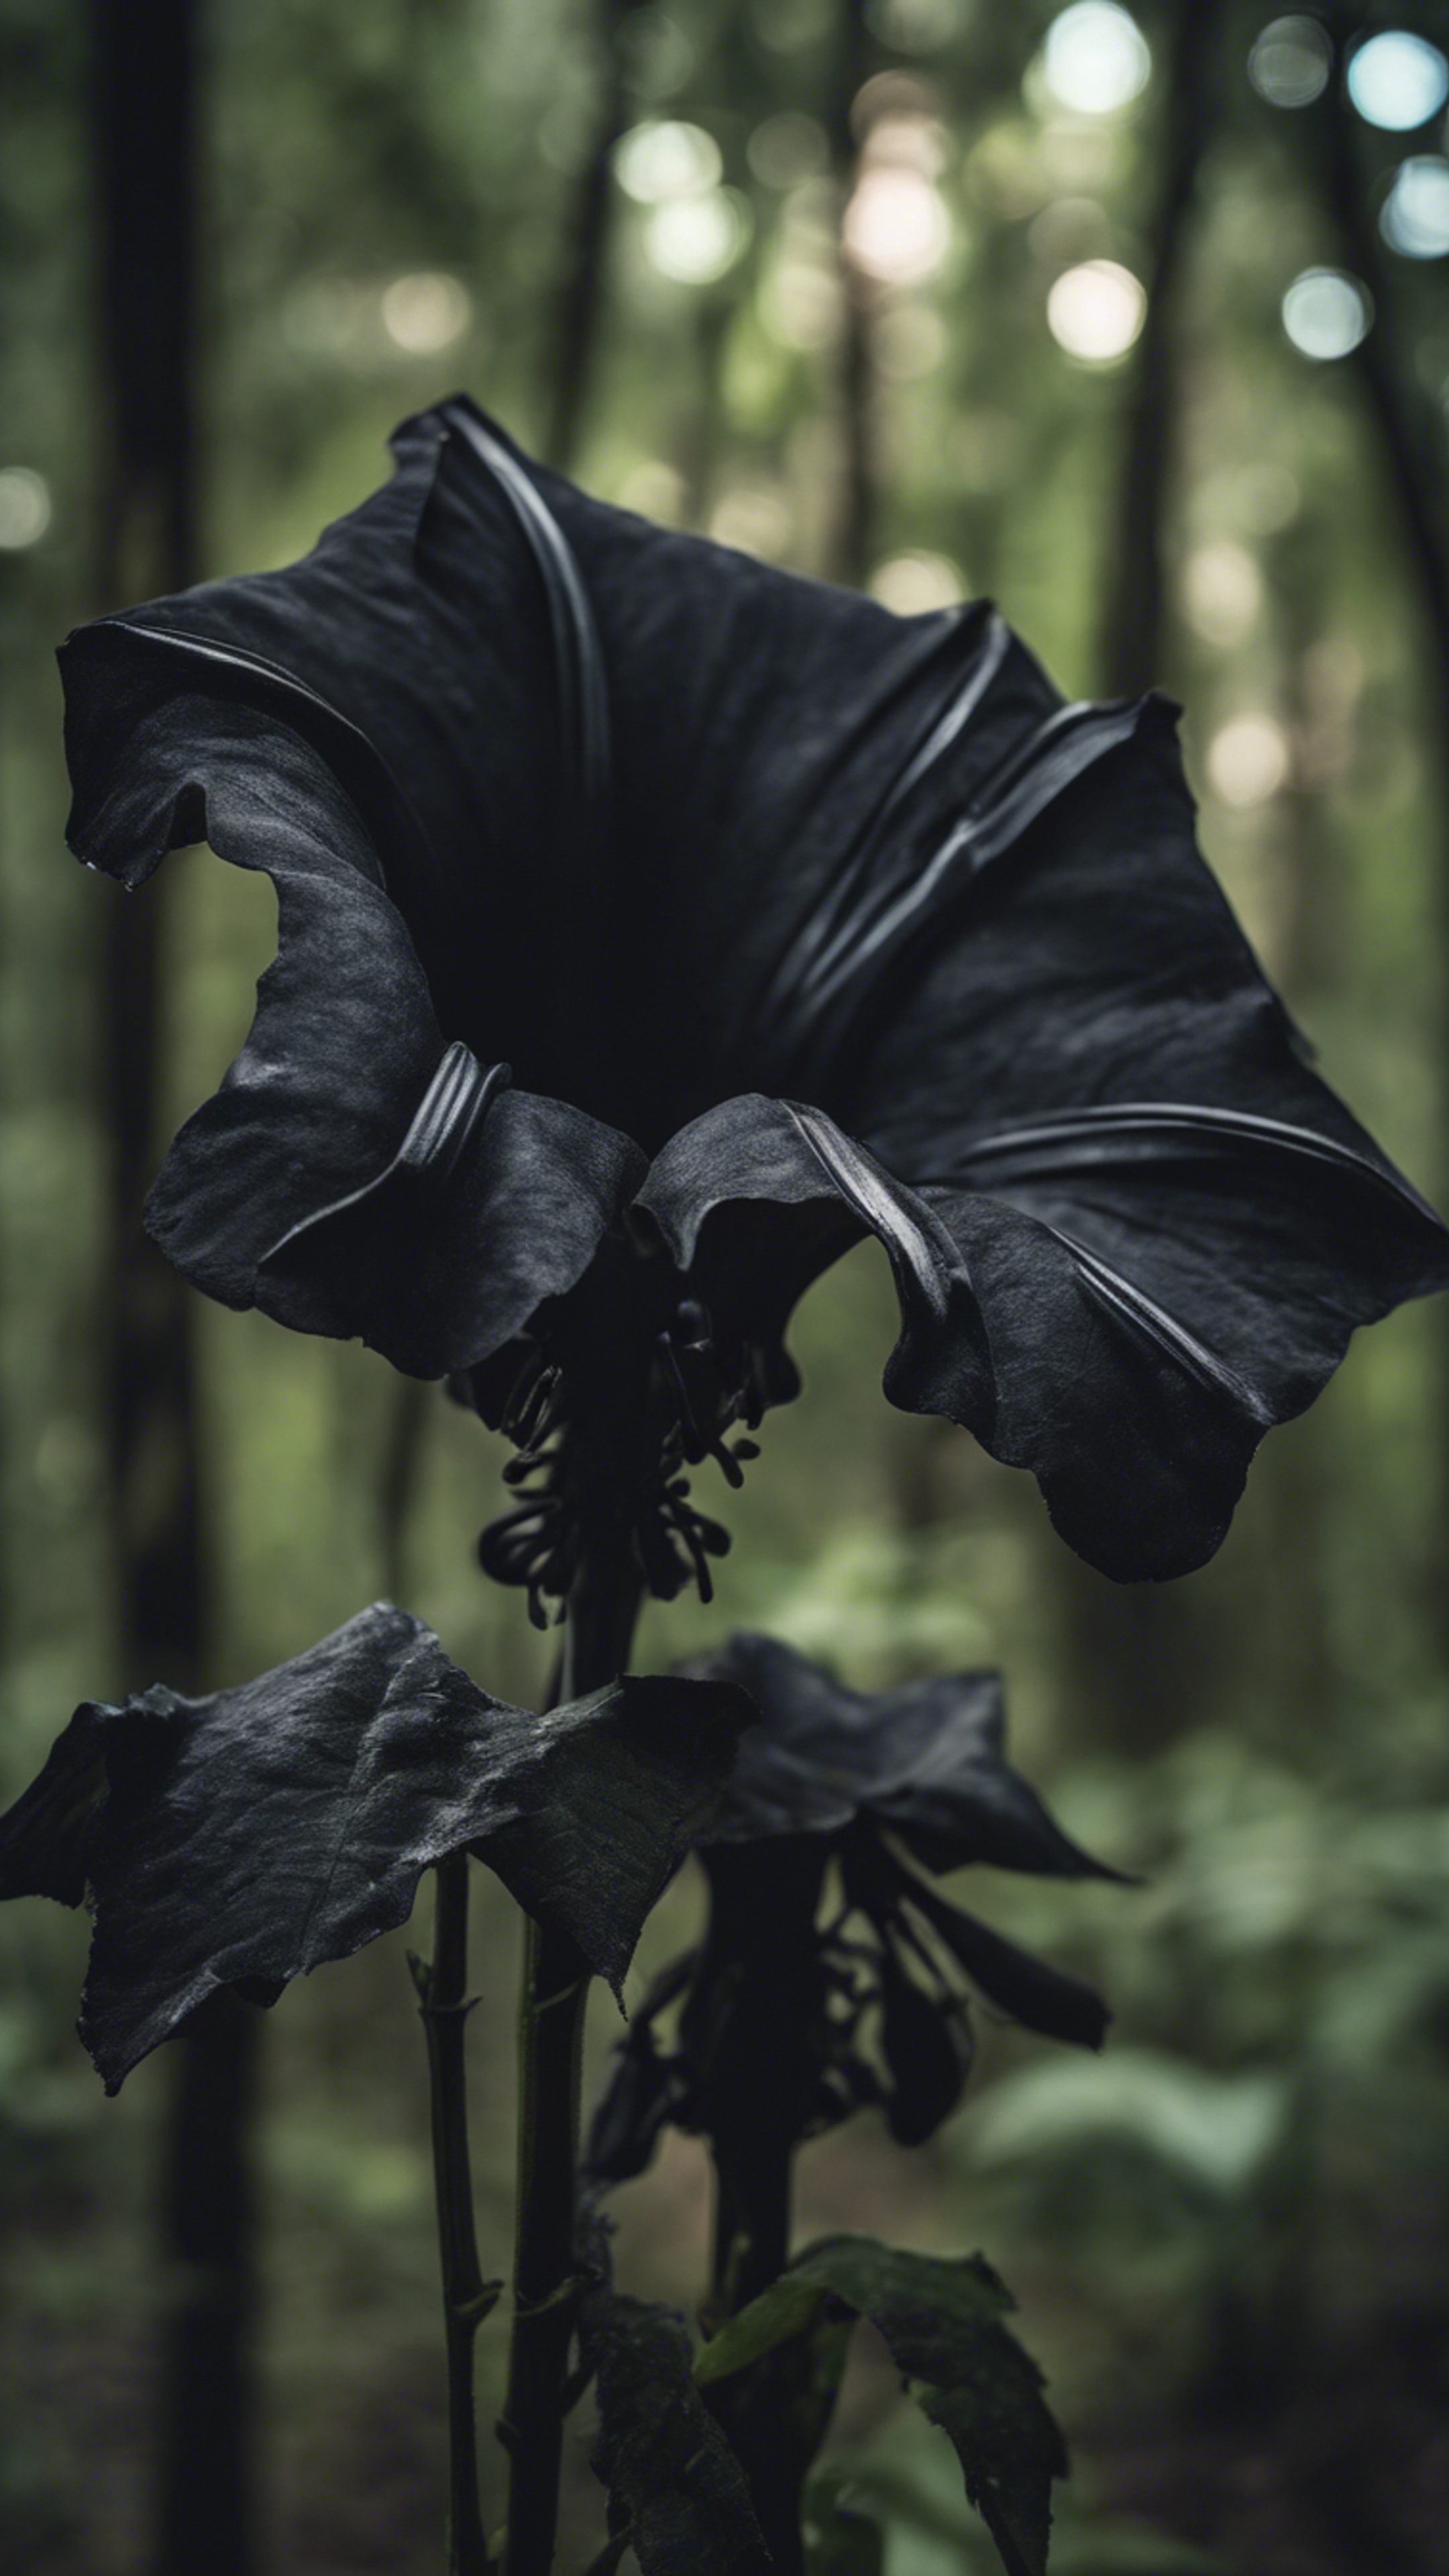 A black trumpet flower evoking an eerie yet captivating atmosphere in the heart of a dense forest.壁紙[87d98efd7999478c8568]